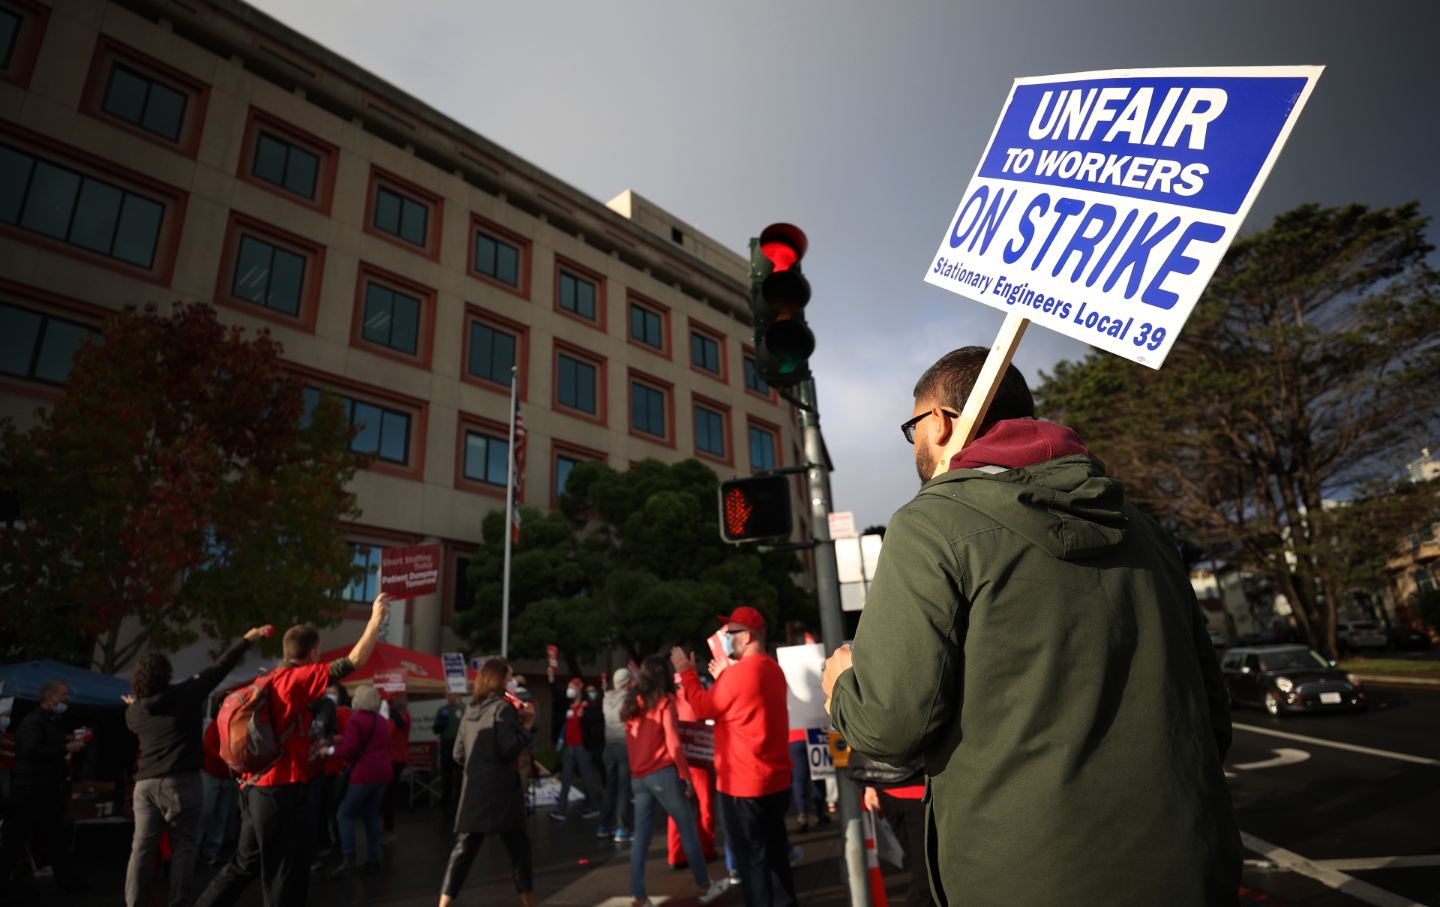 Workers with their backs to the camera wearing red and holding signs